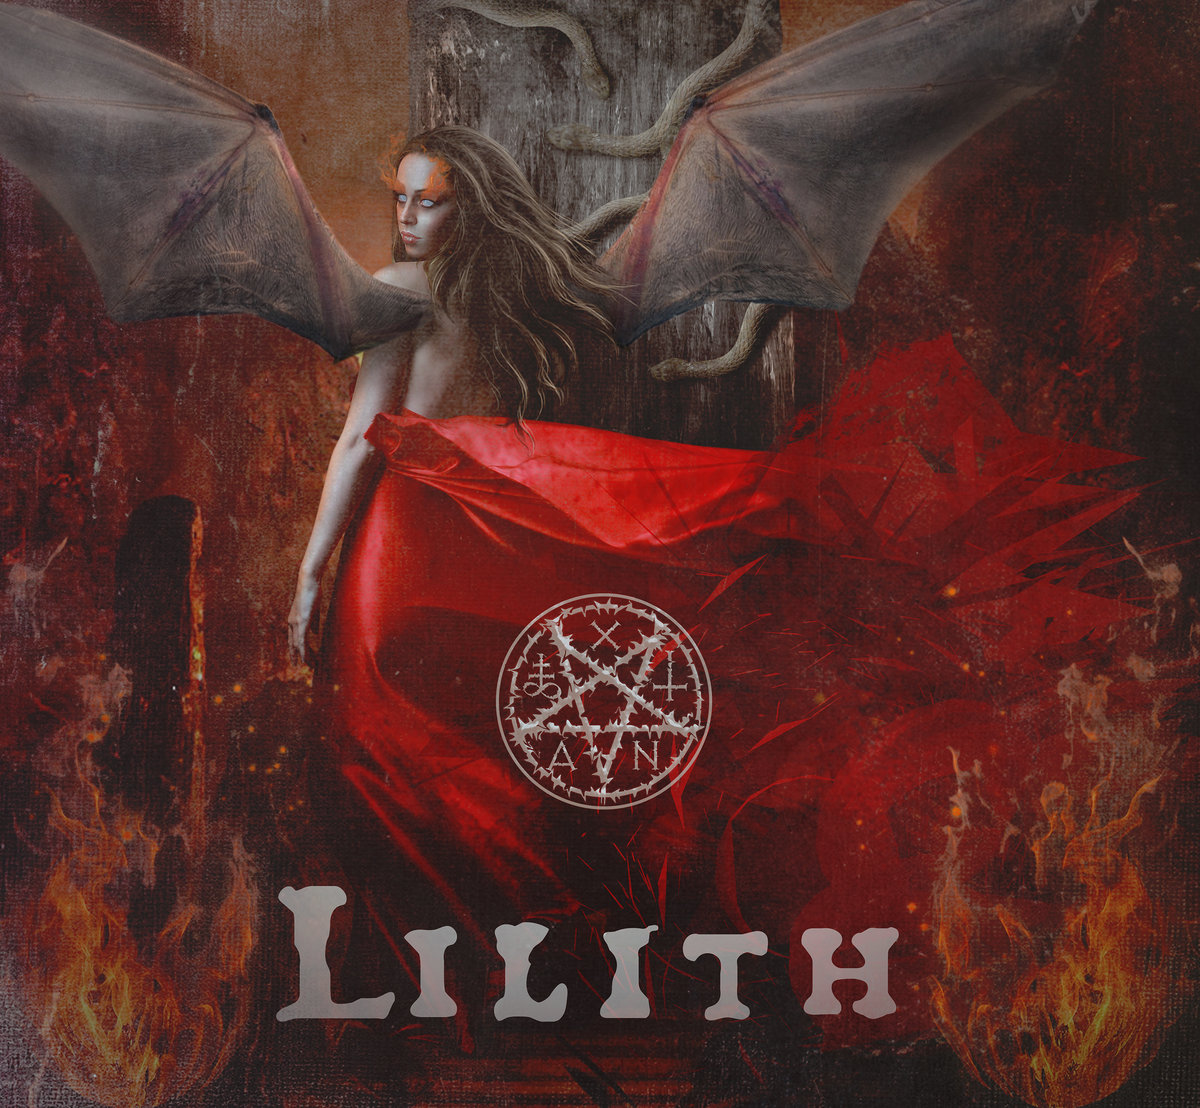 Tiamat/Lilith is the 7 headed Dragon Earth Goddess and the true "Adversary/Leviathan" in the sense that she is the opposite of God before male based religious control erased her existence and replaced it with "Satan". She is the queen of Reptilians.  #SaturnDeathCults  #truth